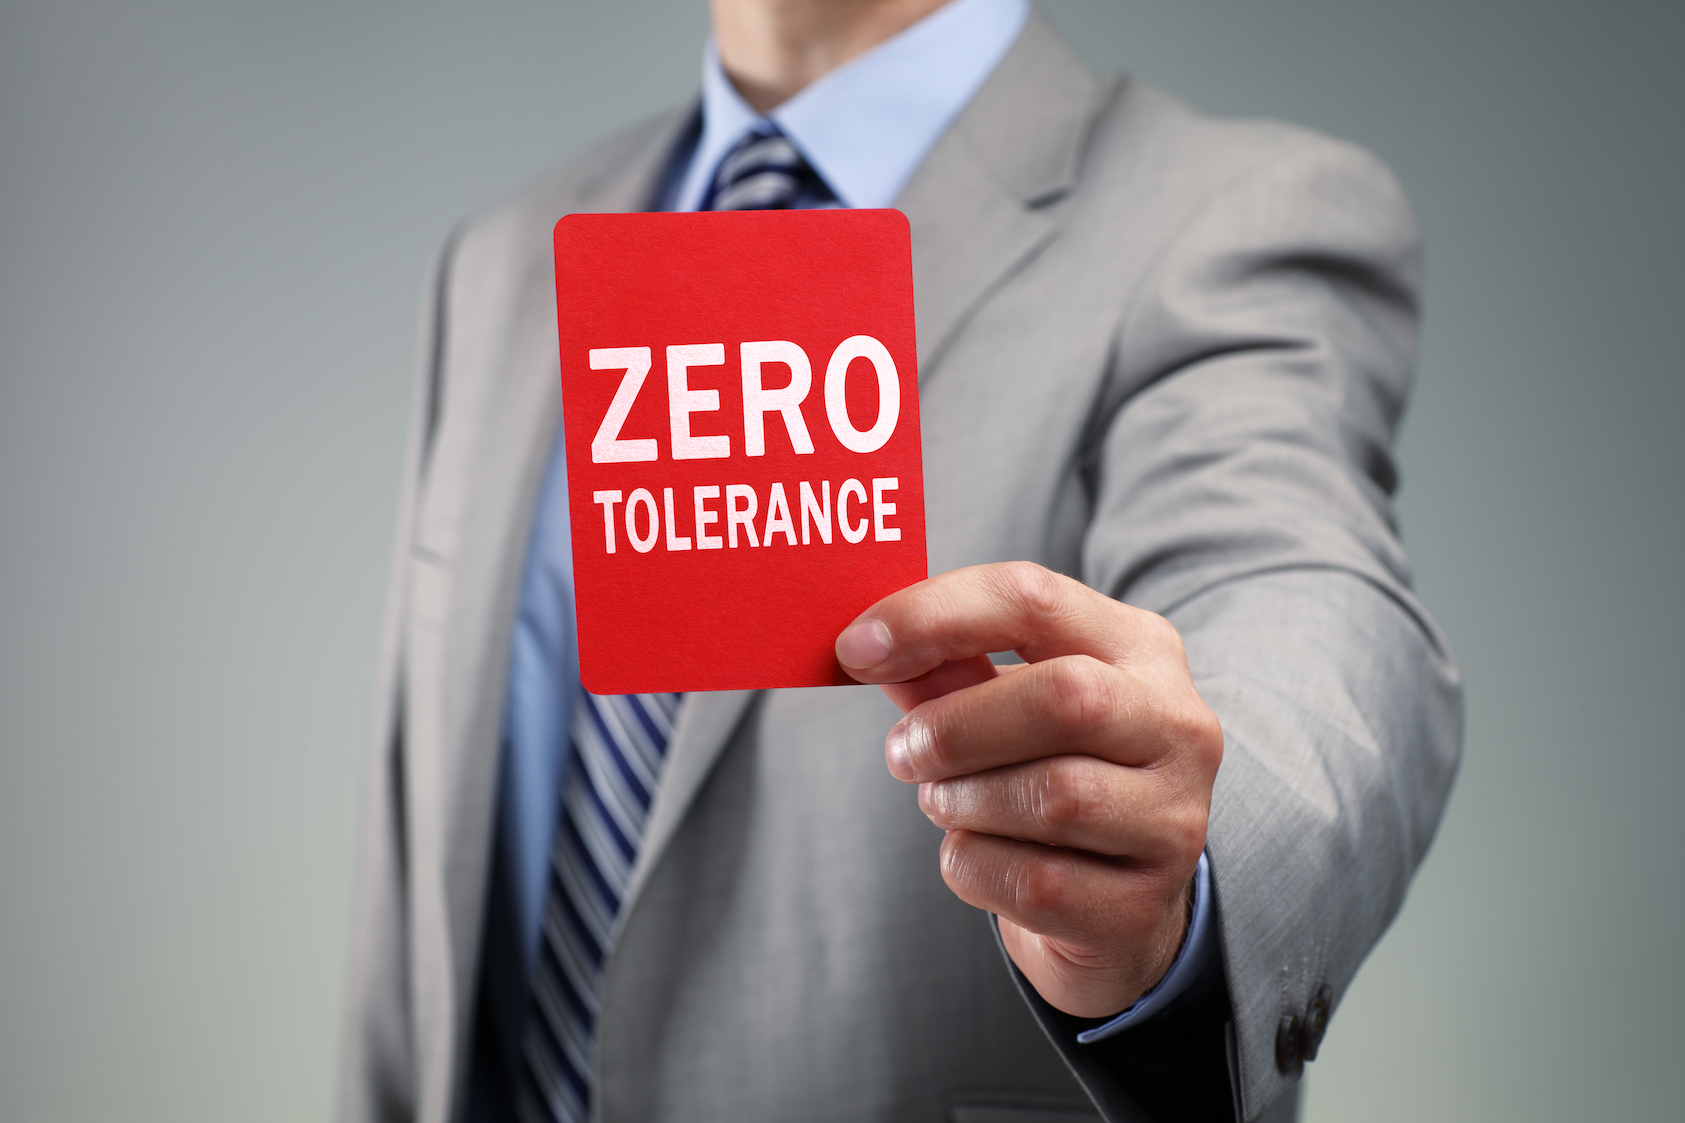 Should our stand be “Zero Tolerance” for workplace bullying?